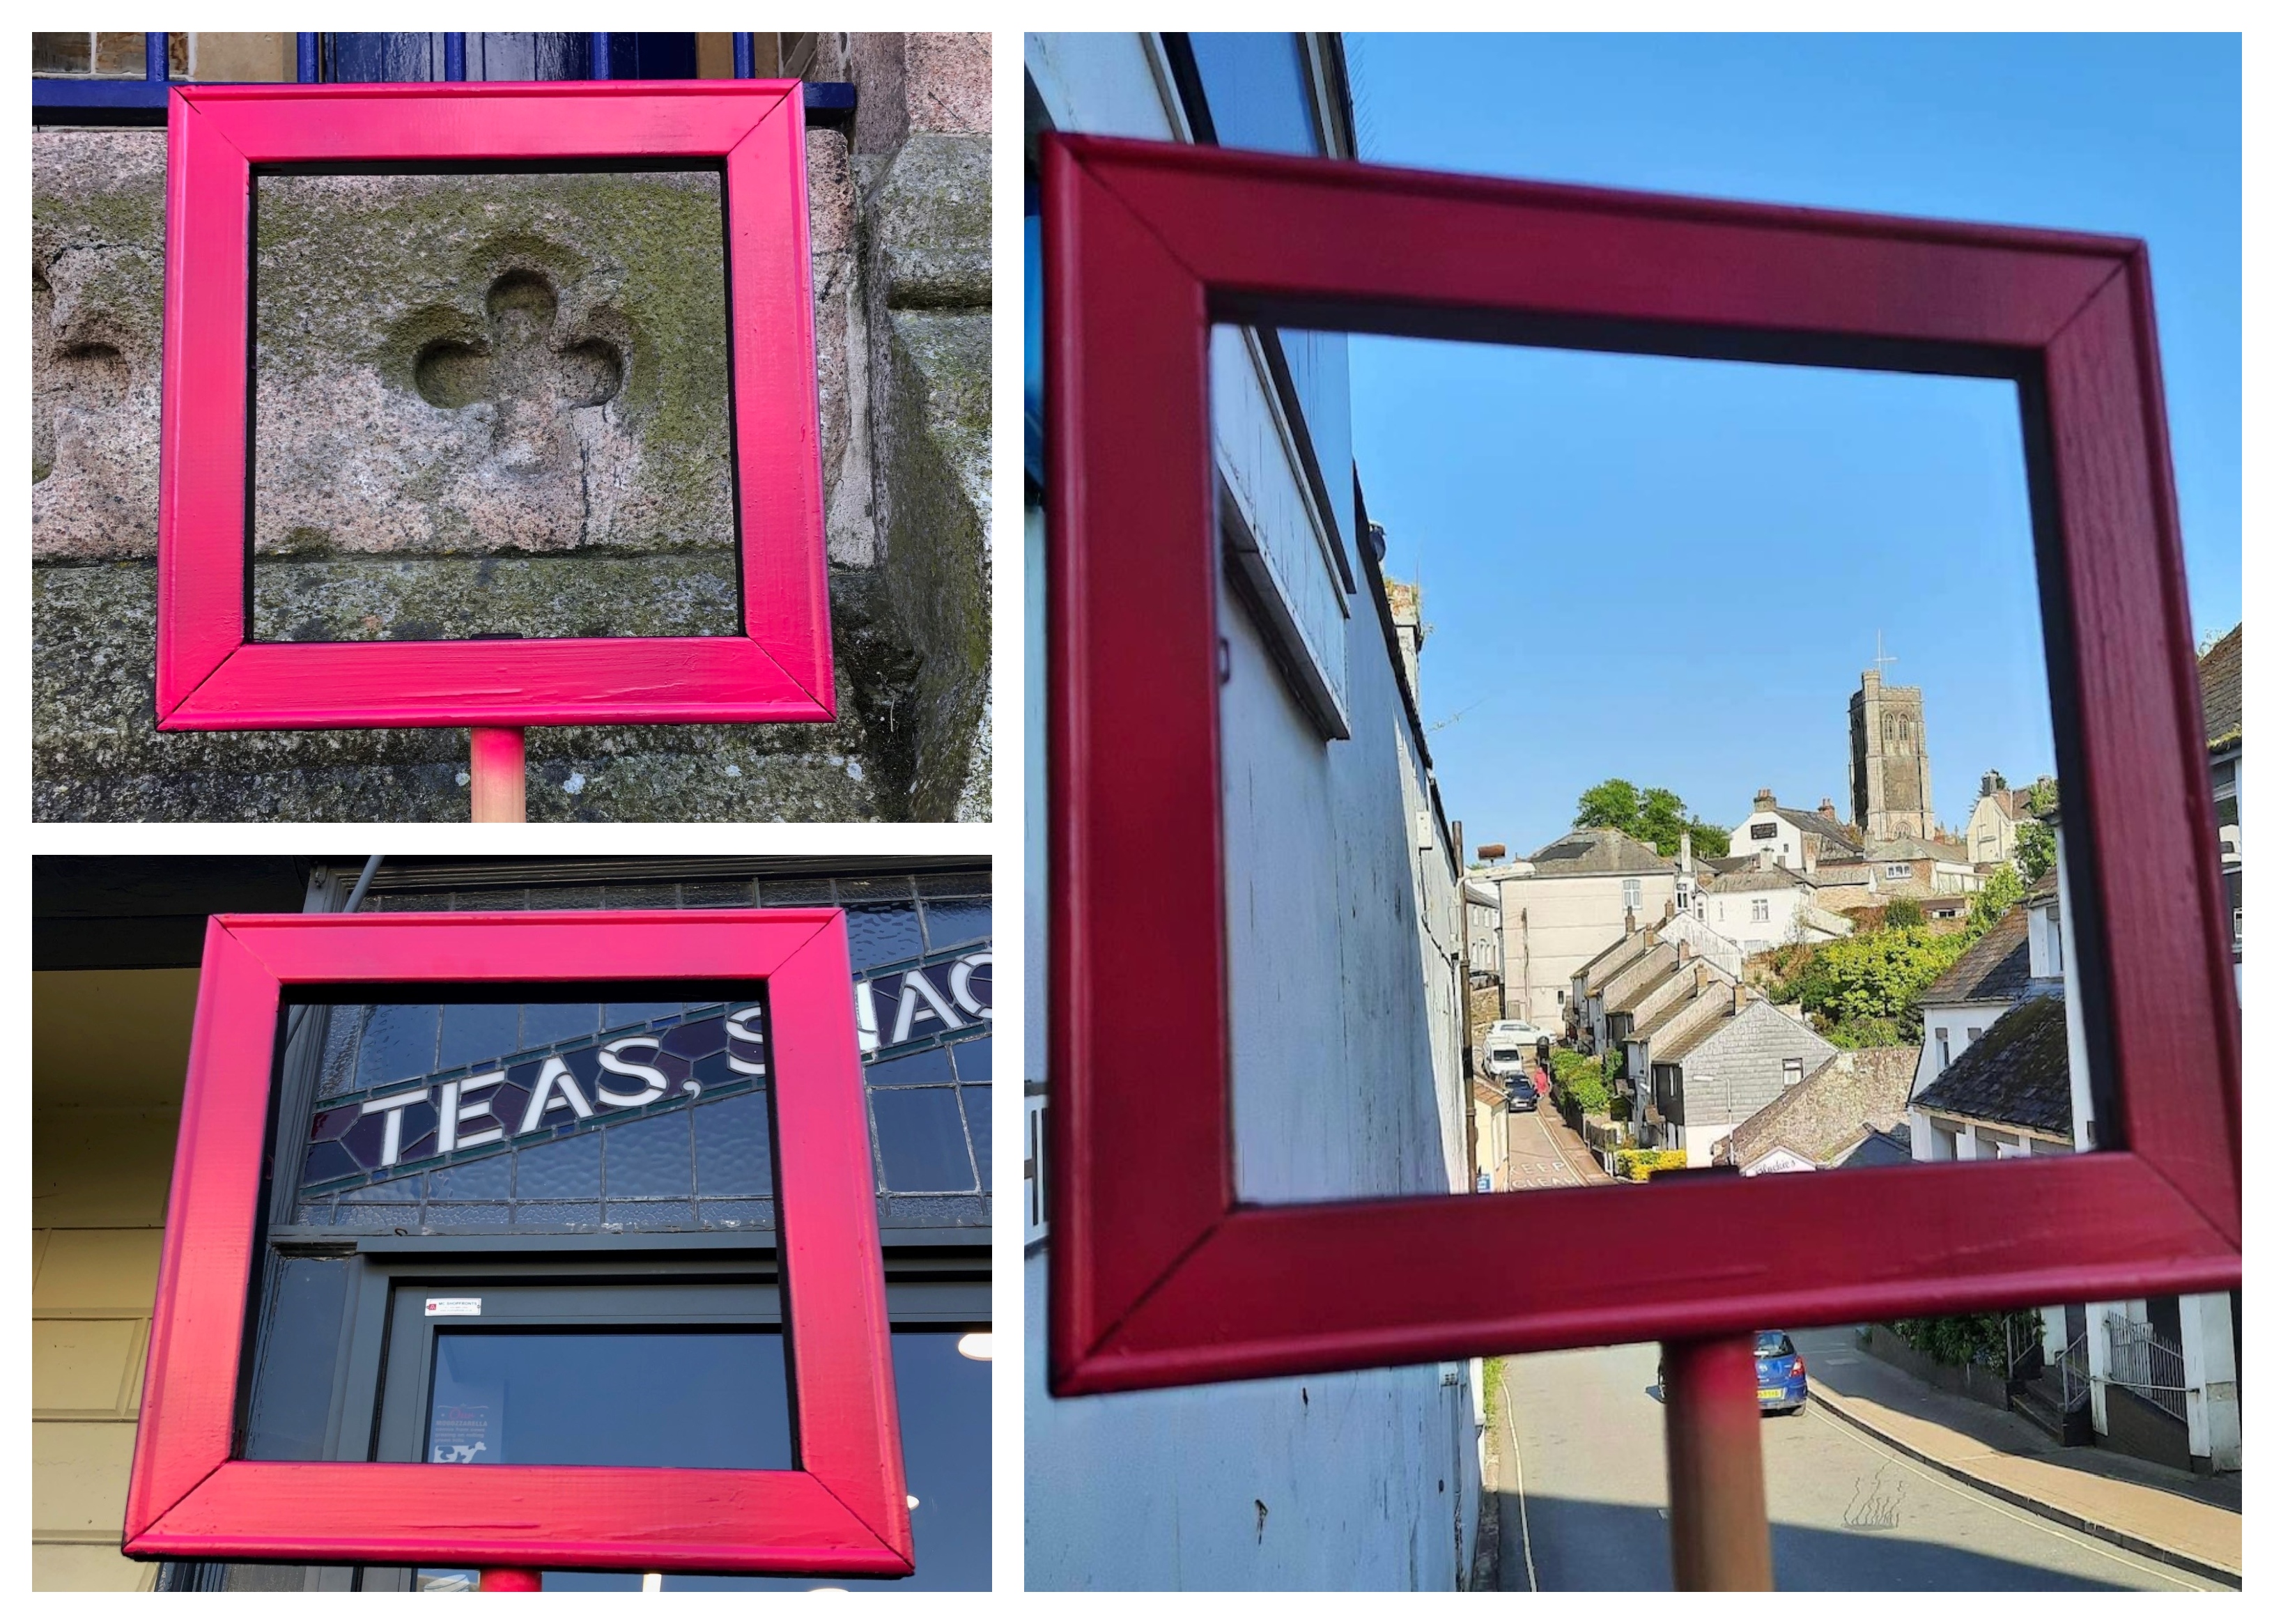 3 square pink frames held up to outline parts of a building or view.